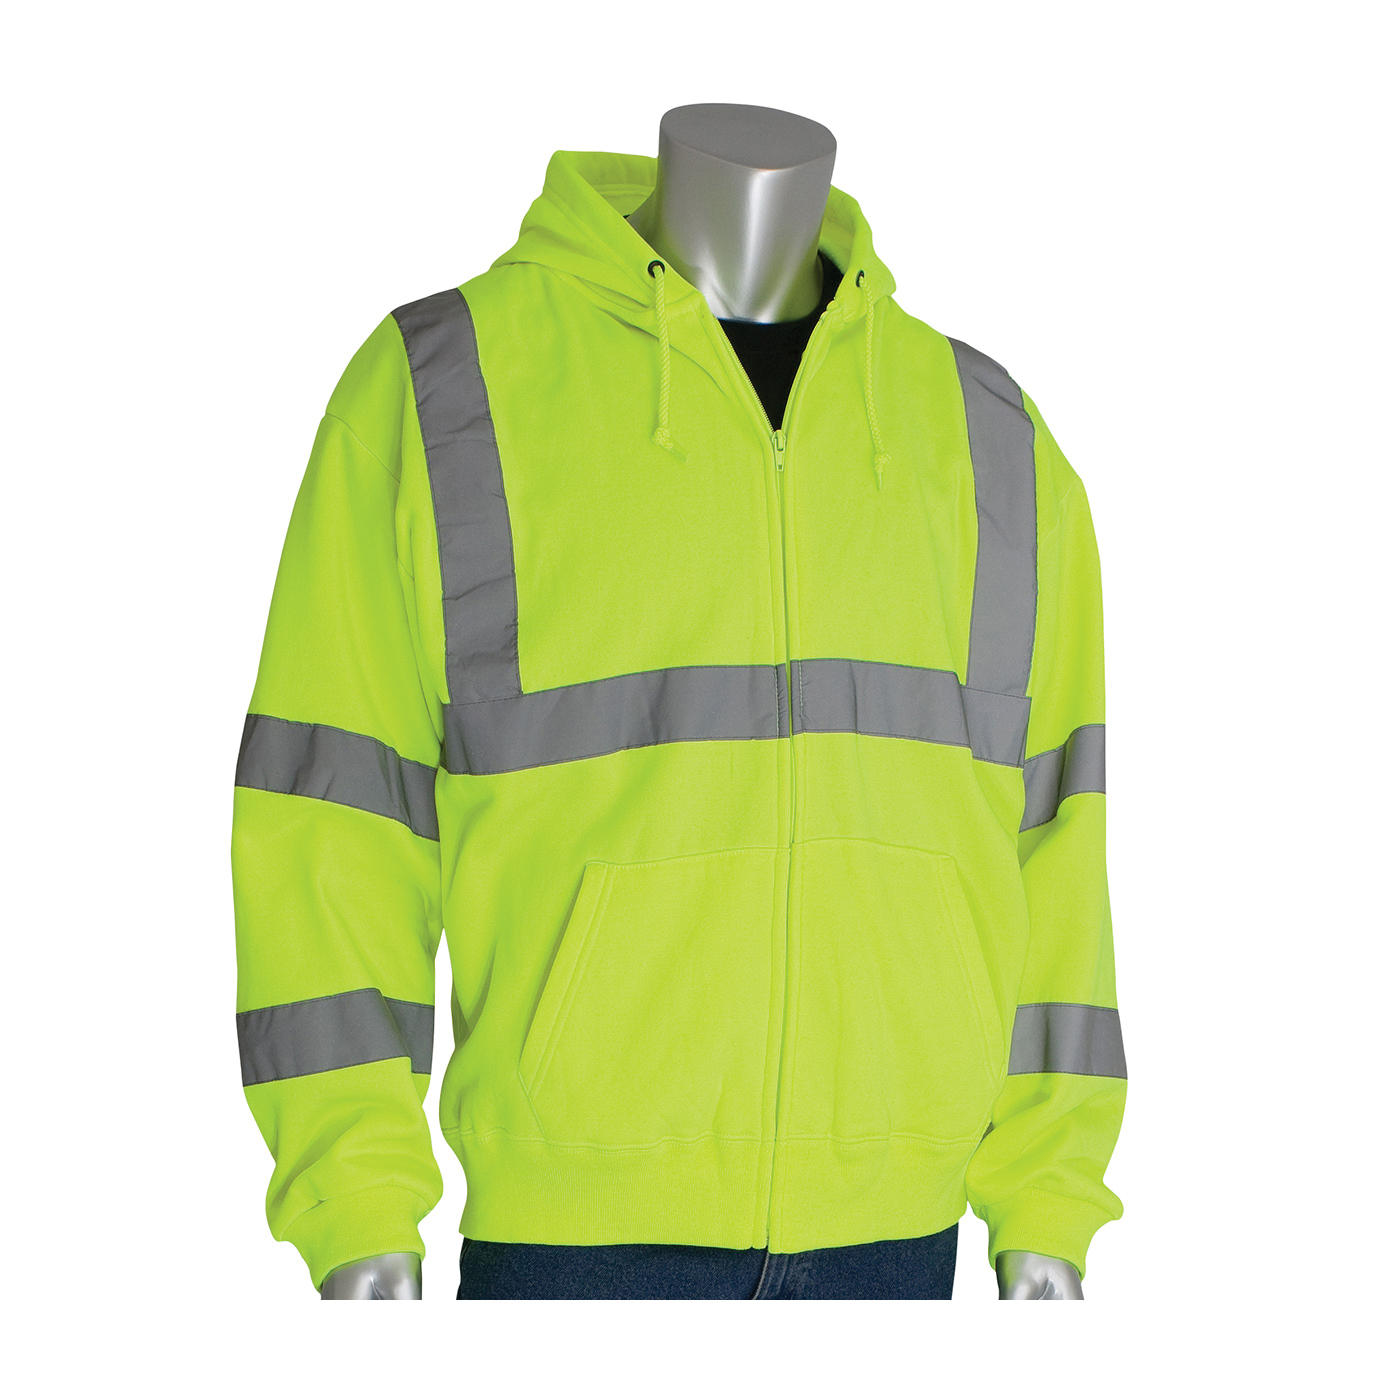 PIP® SafetyGear 323-HSSELY-3X Premium High Visibility Sweatshirt, 3XL, Yellow, Wicking Polyester, 29.9 in L